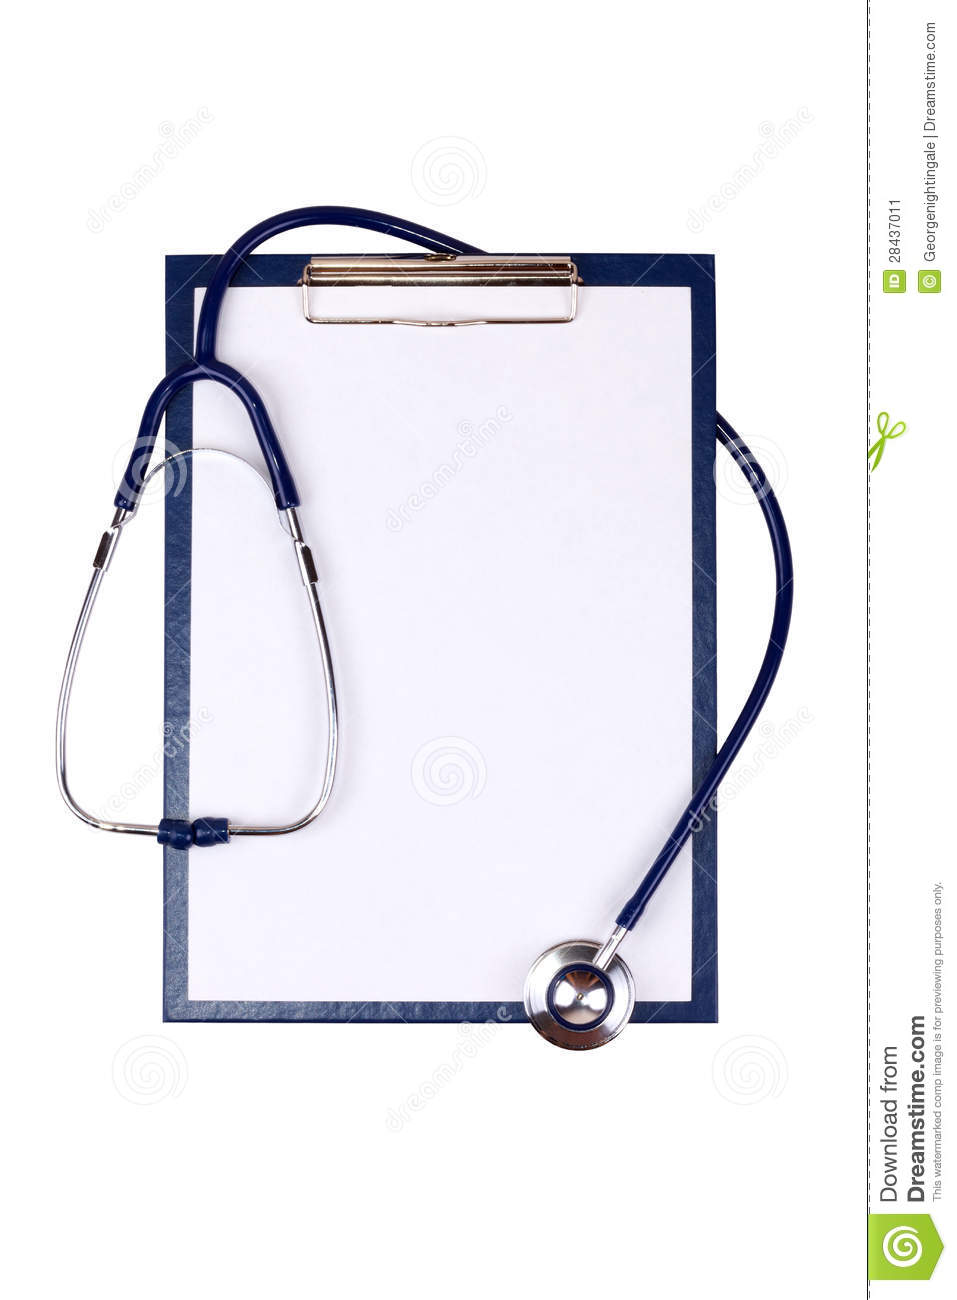 Medical Clipboard And Stethoscope Stock Image   Image  28437011